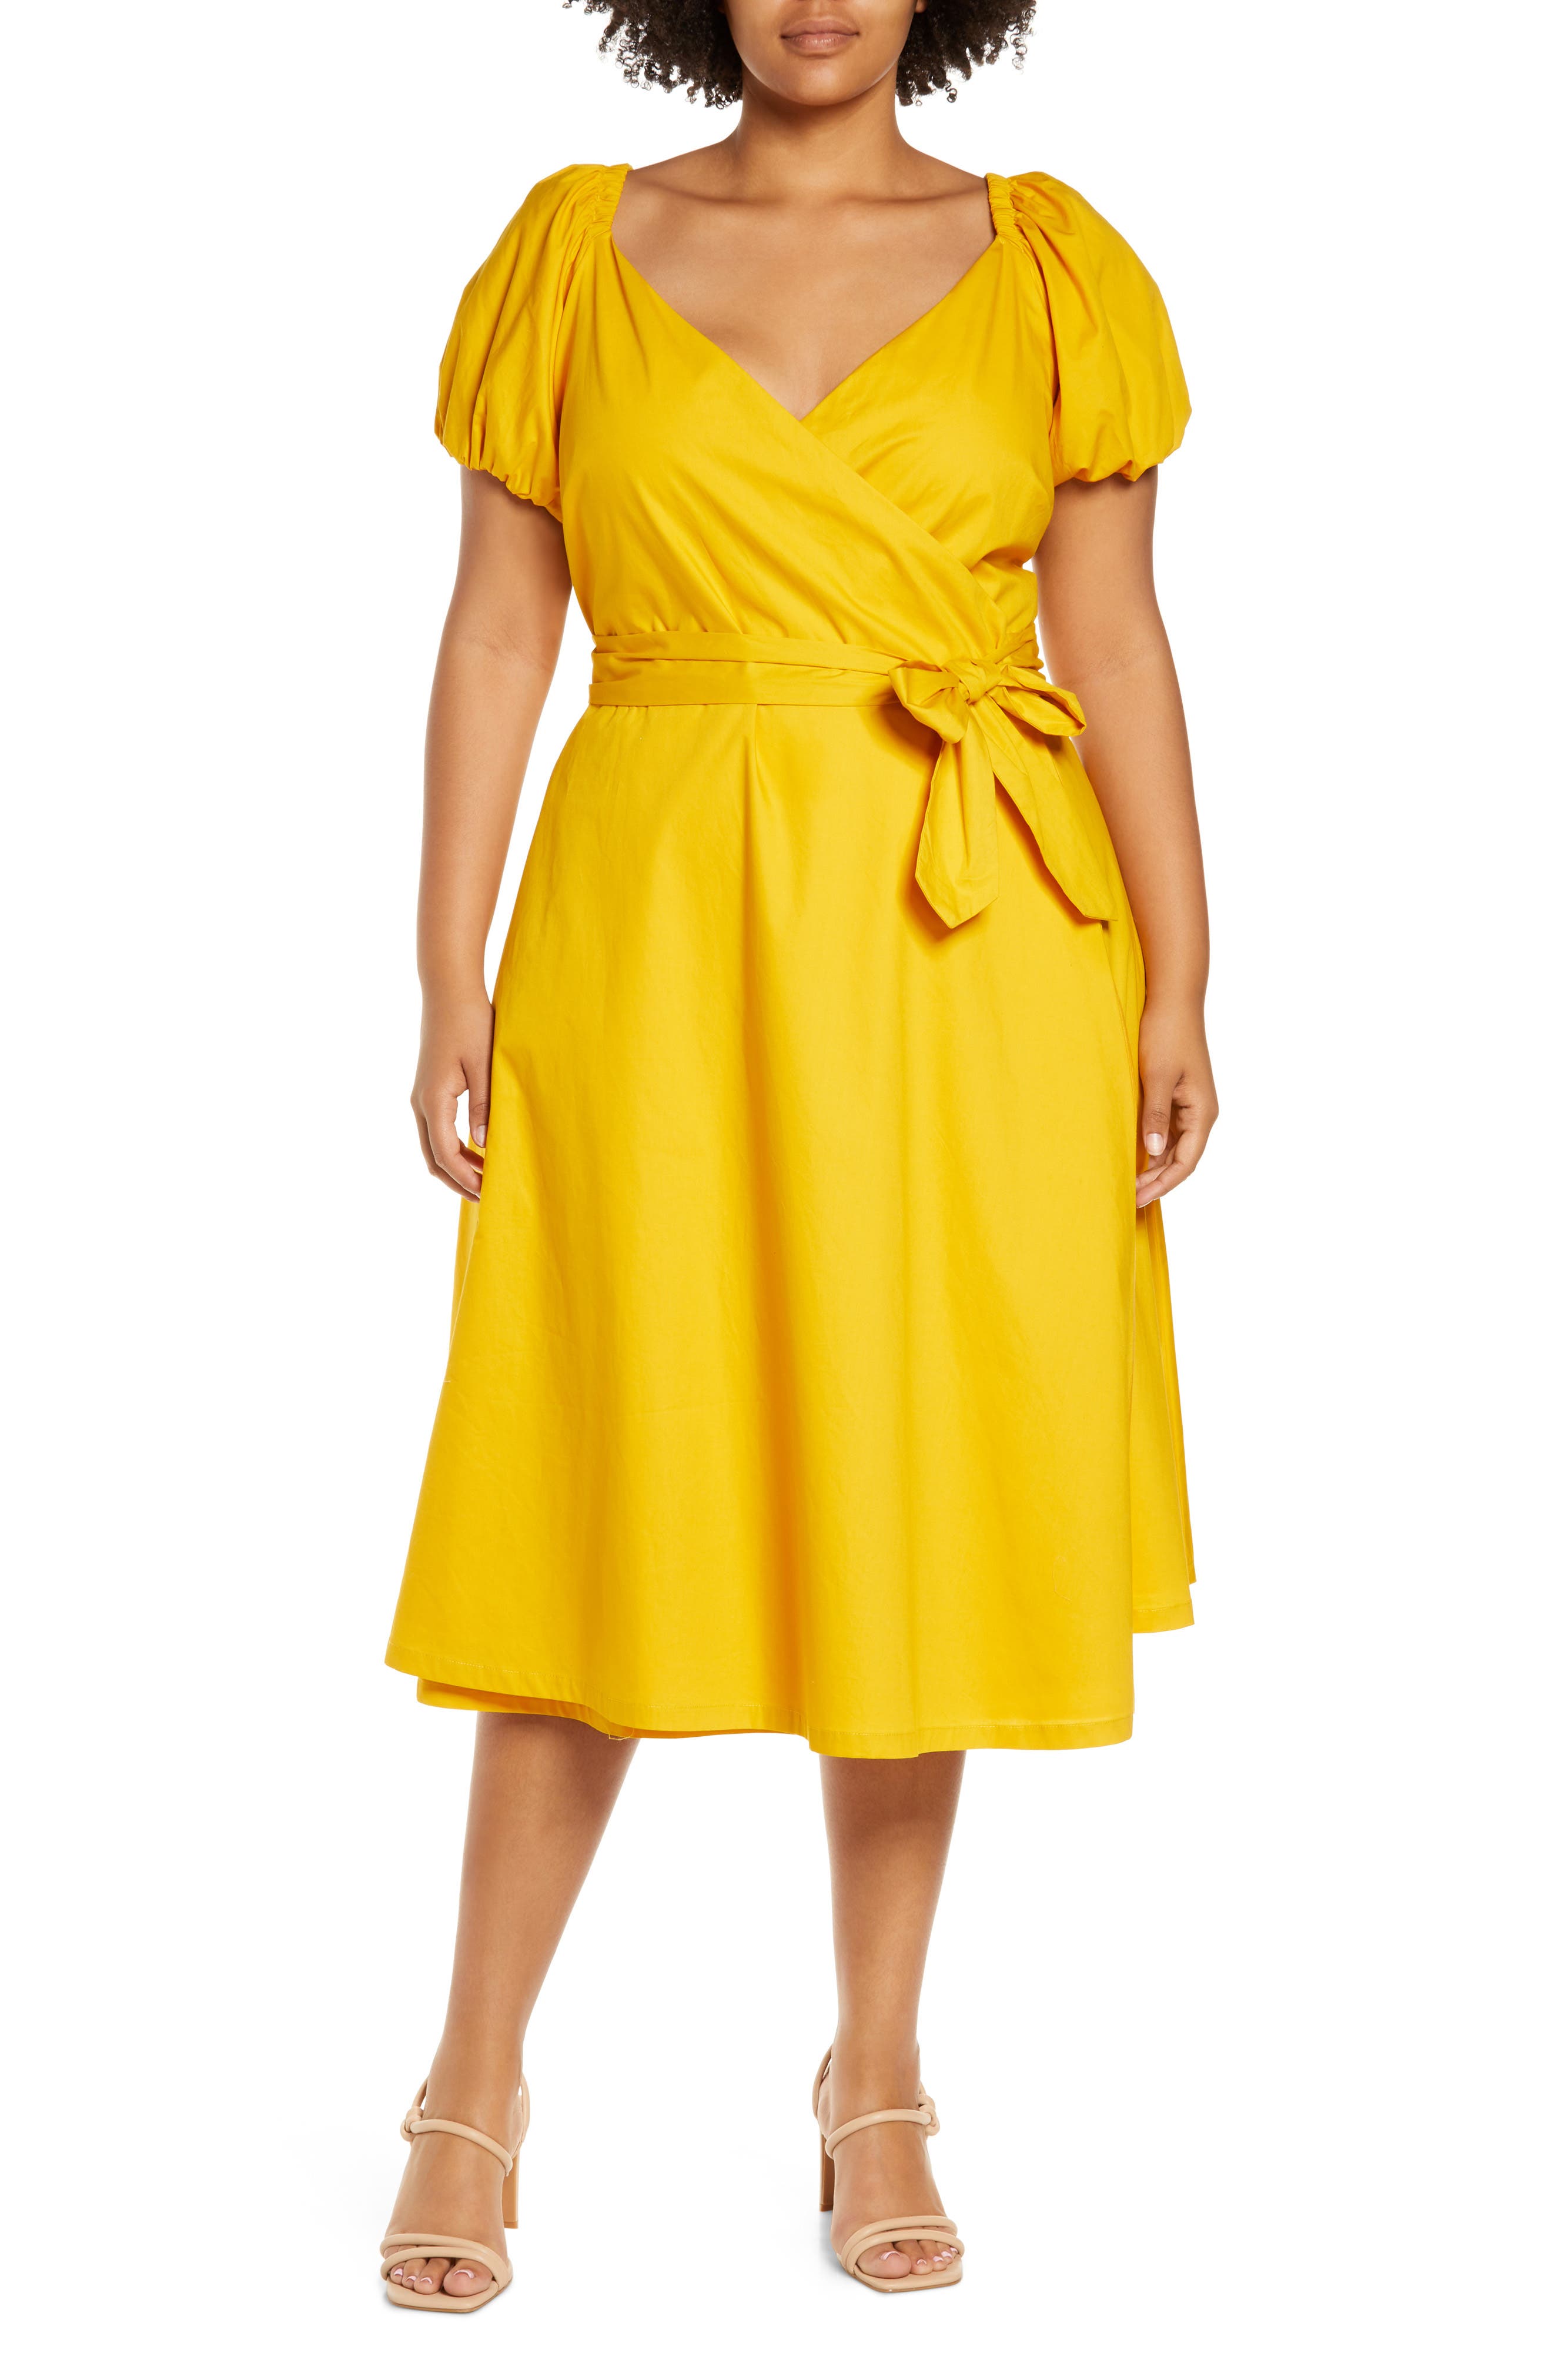 Yellow Plus Size Clothing For Women ...